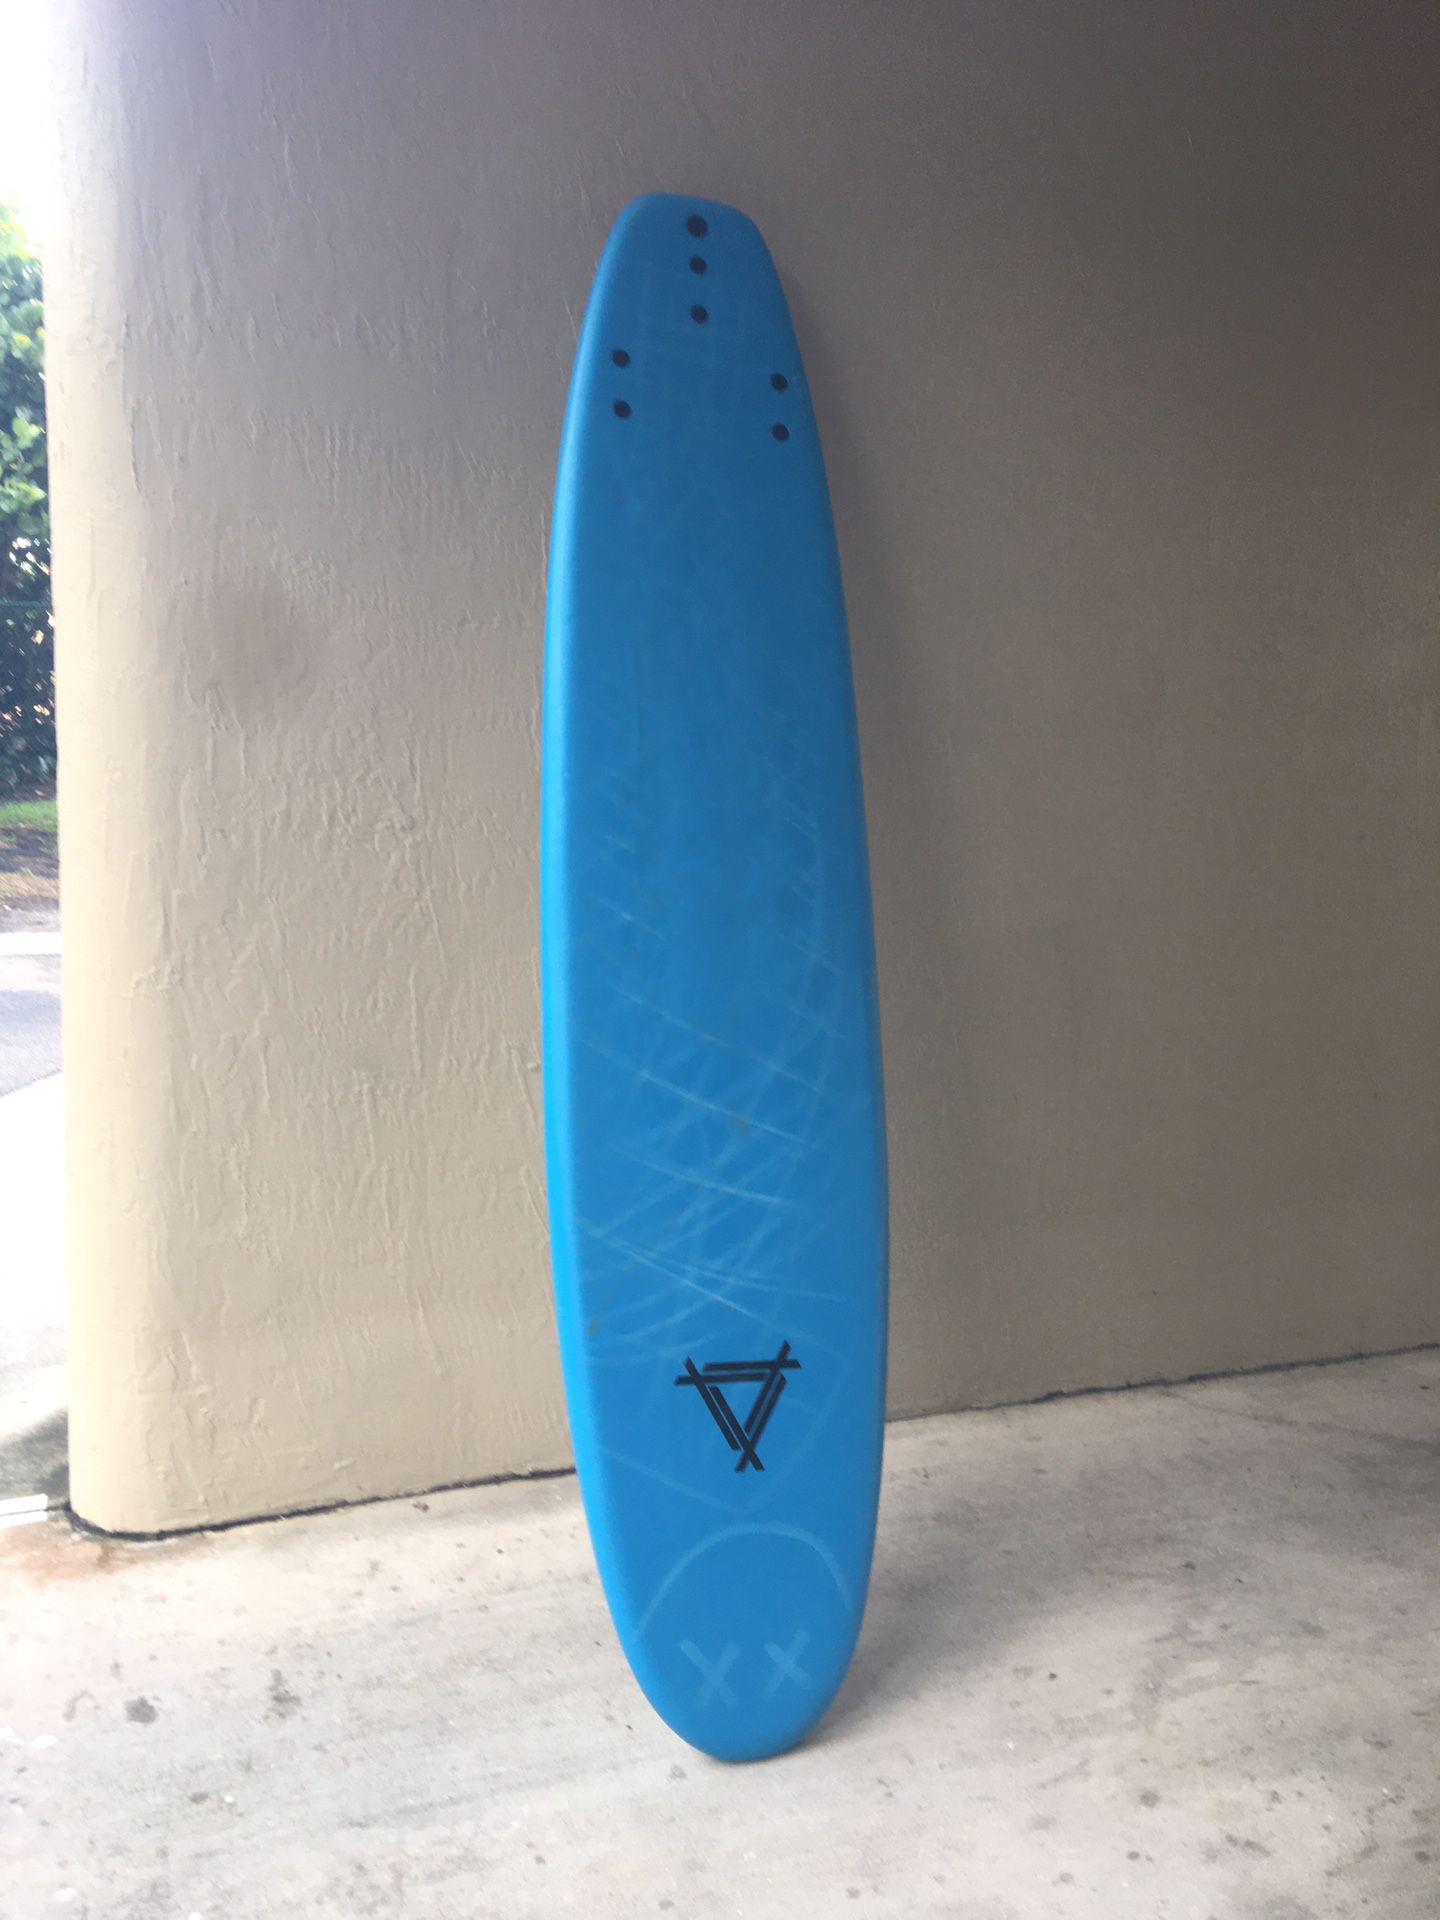 9"0 SOFT TOP LONG BOARD SURFBOARD EXCELLENT CONDITION WITH FINS! 